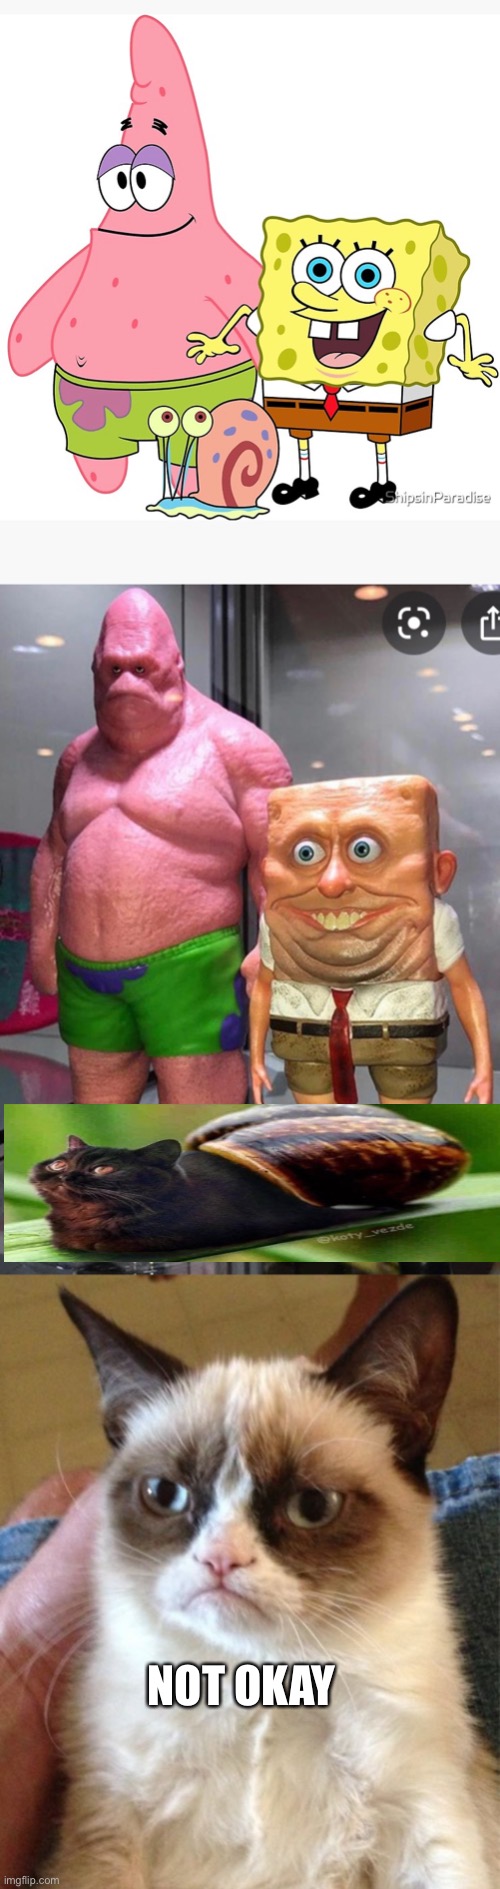 SpongeBob Patrick Star and Gary IRL | NOT OKAY | image tagged in grumpy cat,cursed image,cursed,spongebob,gary,patrick star | made w/ Imgflip meme maker